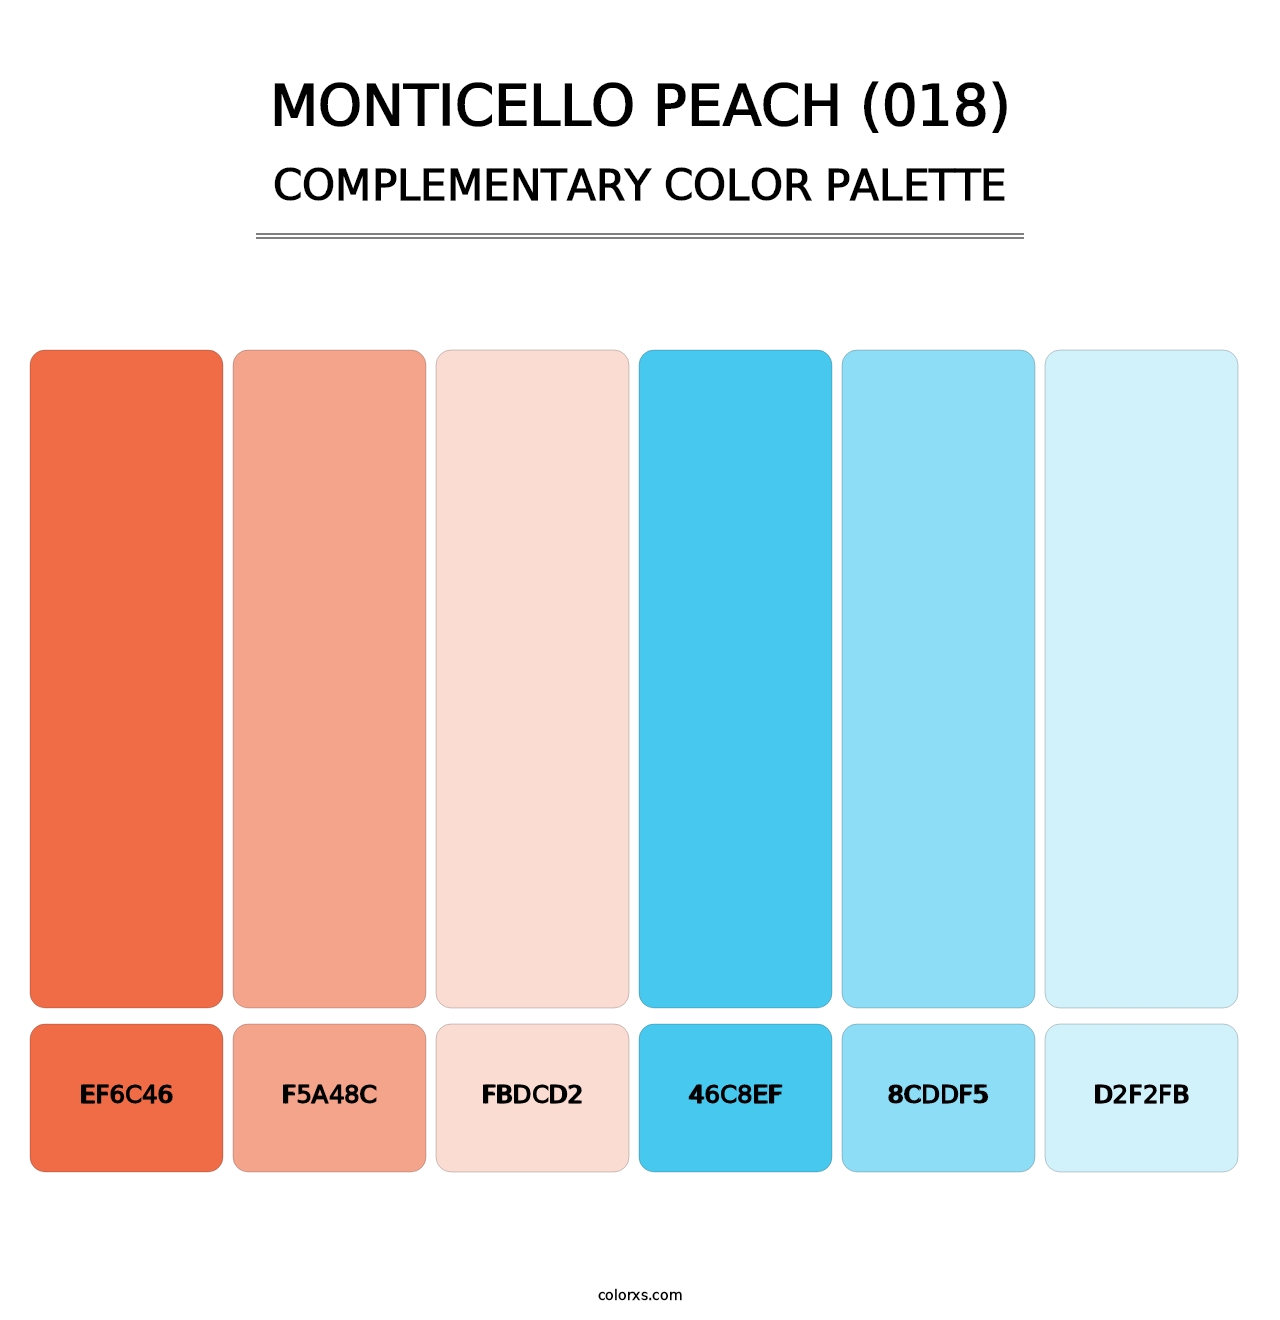 Monticello Peach (018) - Complementary Color Palette